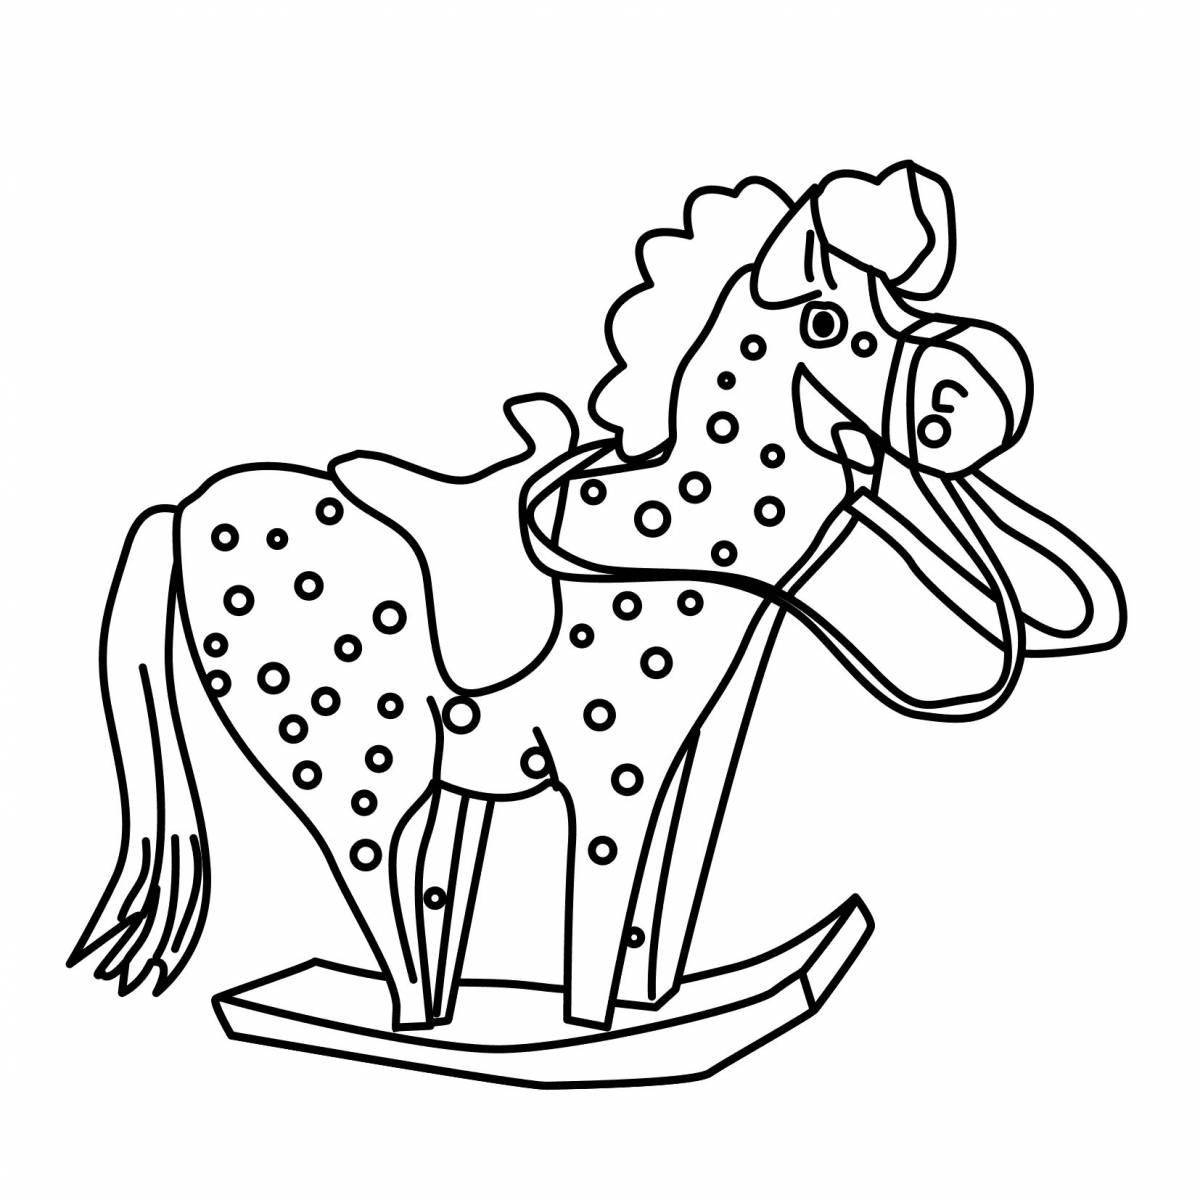 Rocking chair live coloring page